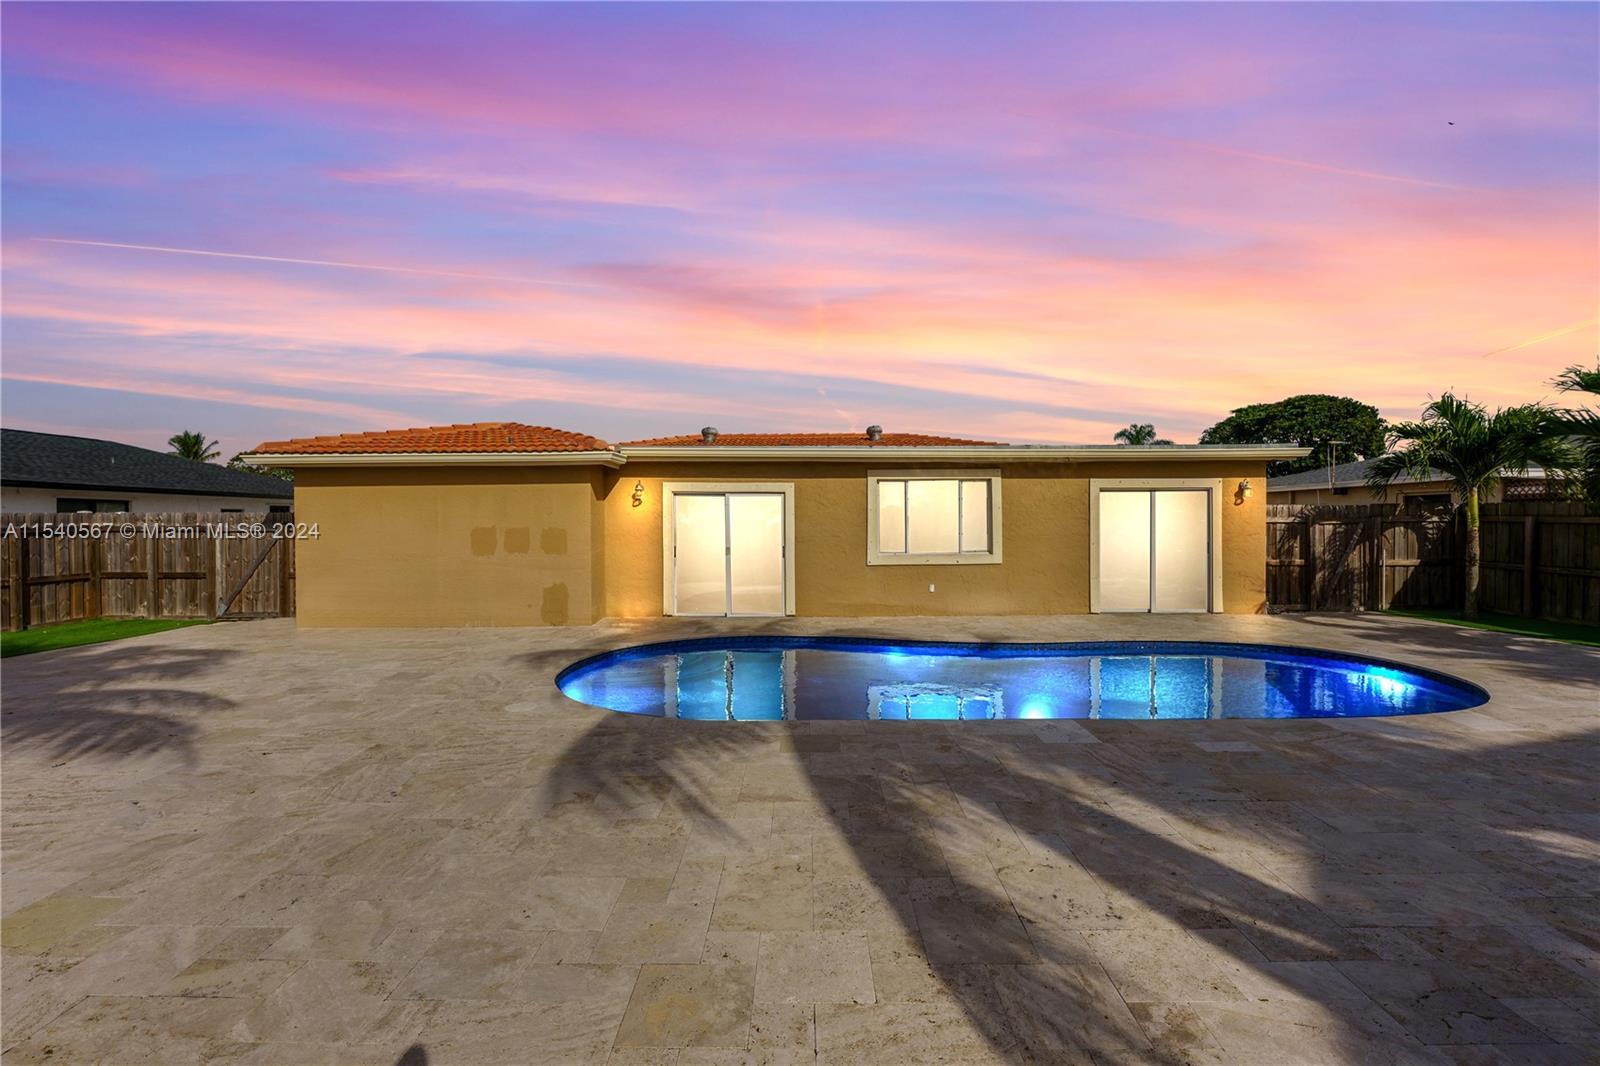 Beautiful 3 Bed and 2 Bath + Great Bonus Room, Amazing Pool and backyard space to enjoy with family.